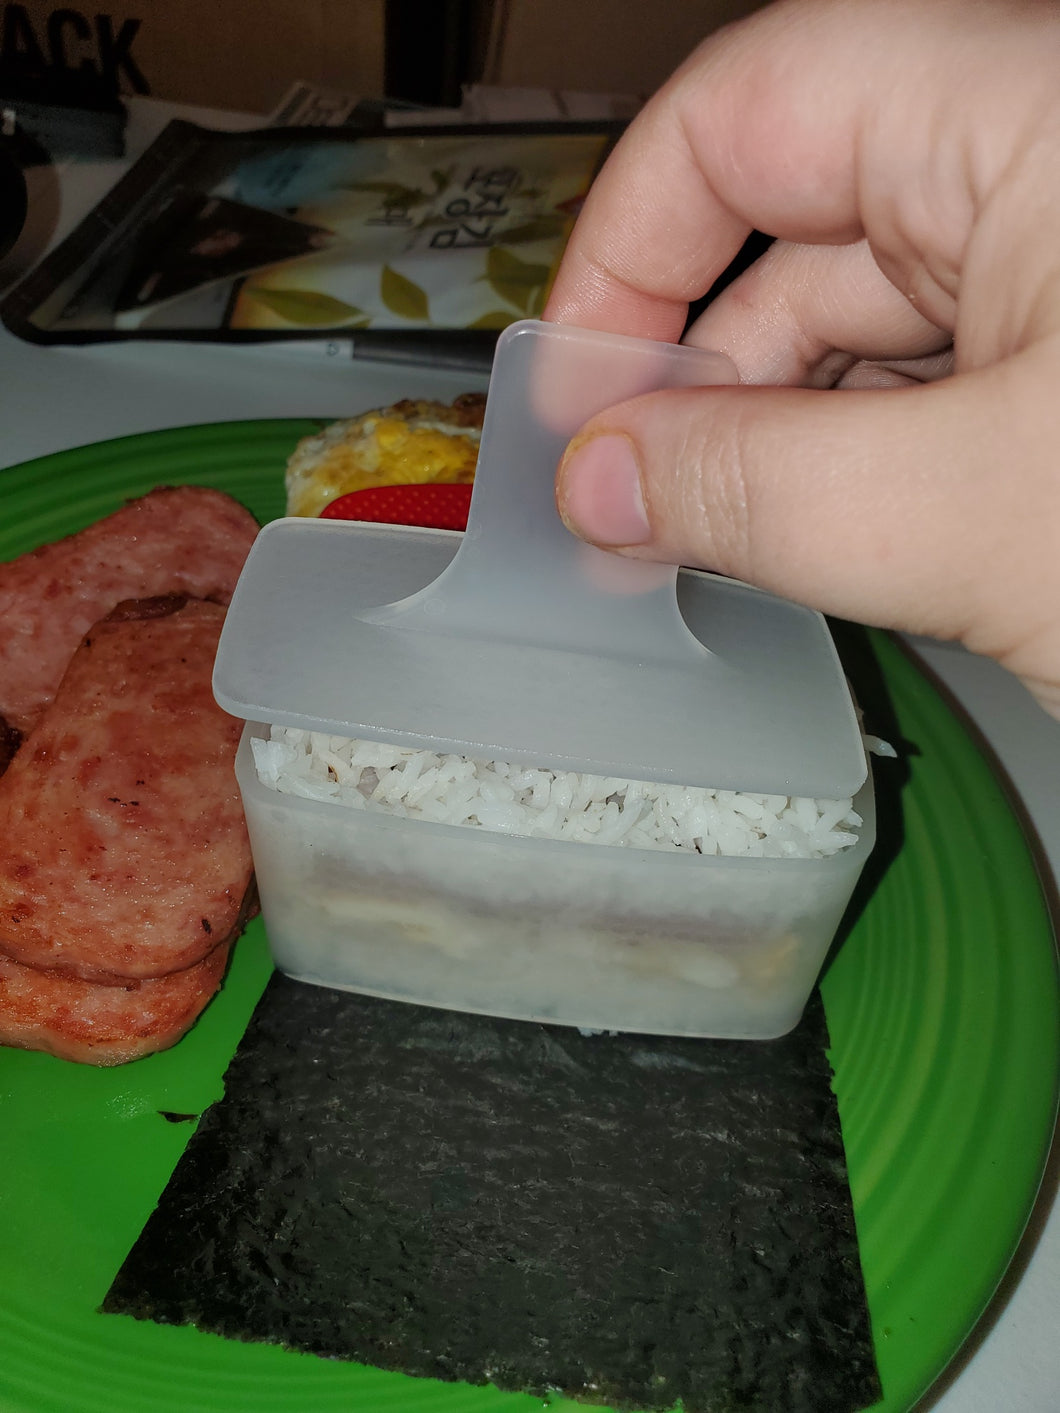 Musubi mold in action, with all the ingredients in the mold and a person holding the plunger, about to put it in. There is also spam and fried eggs visible on the plate.